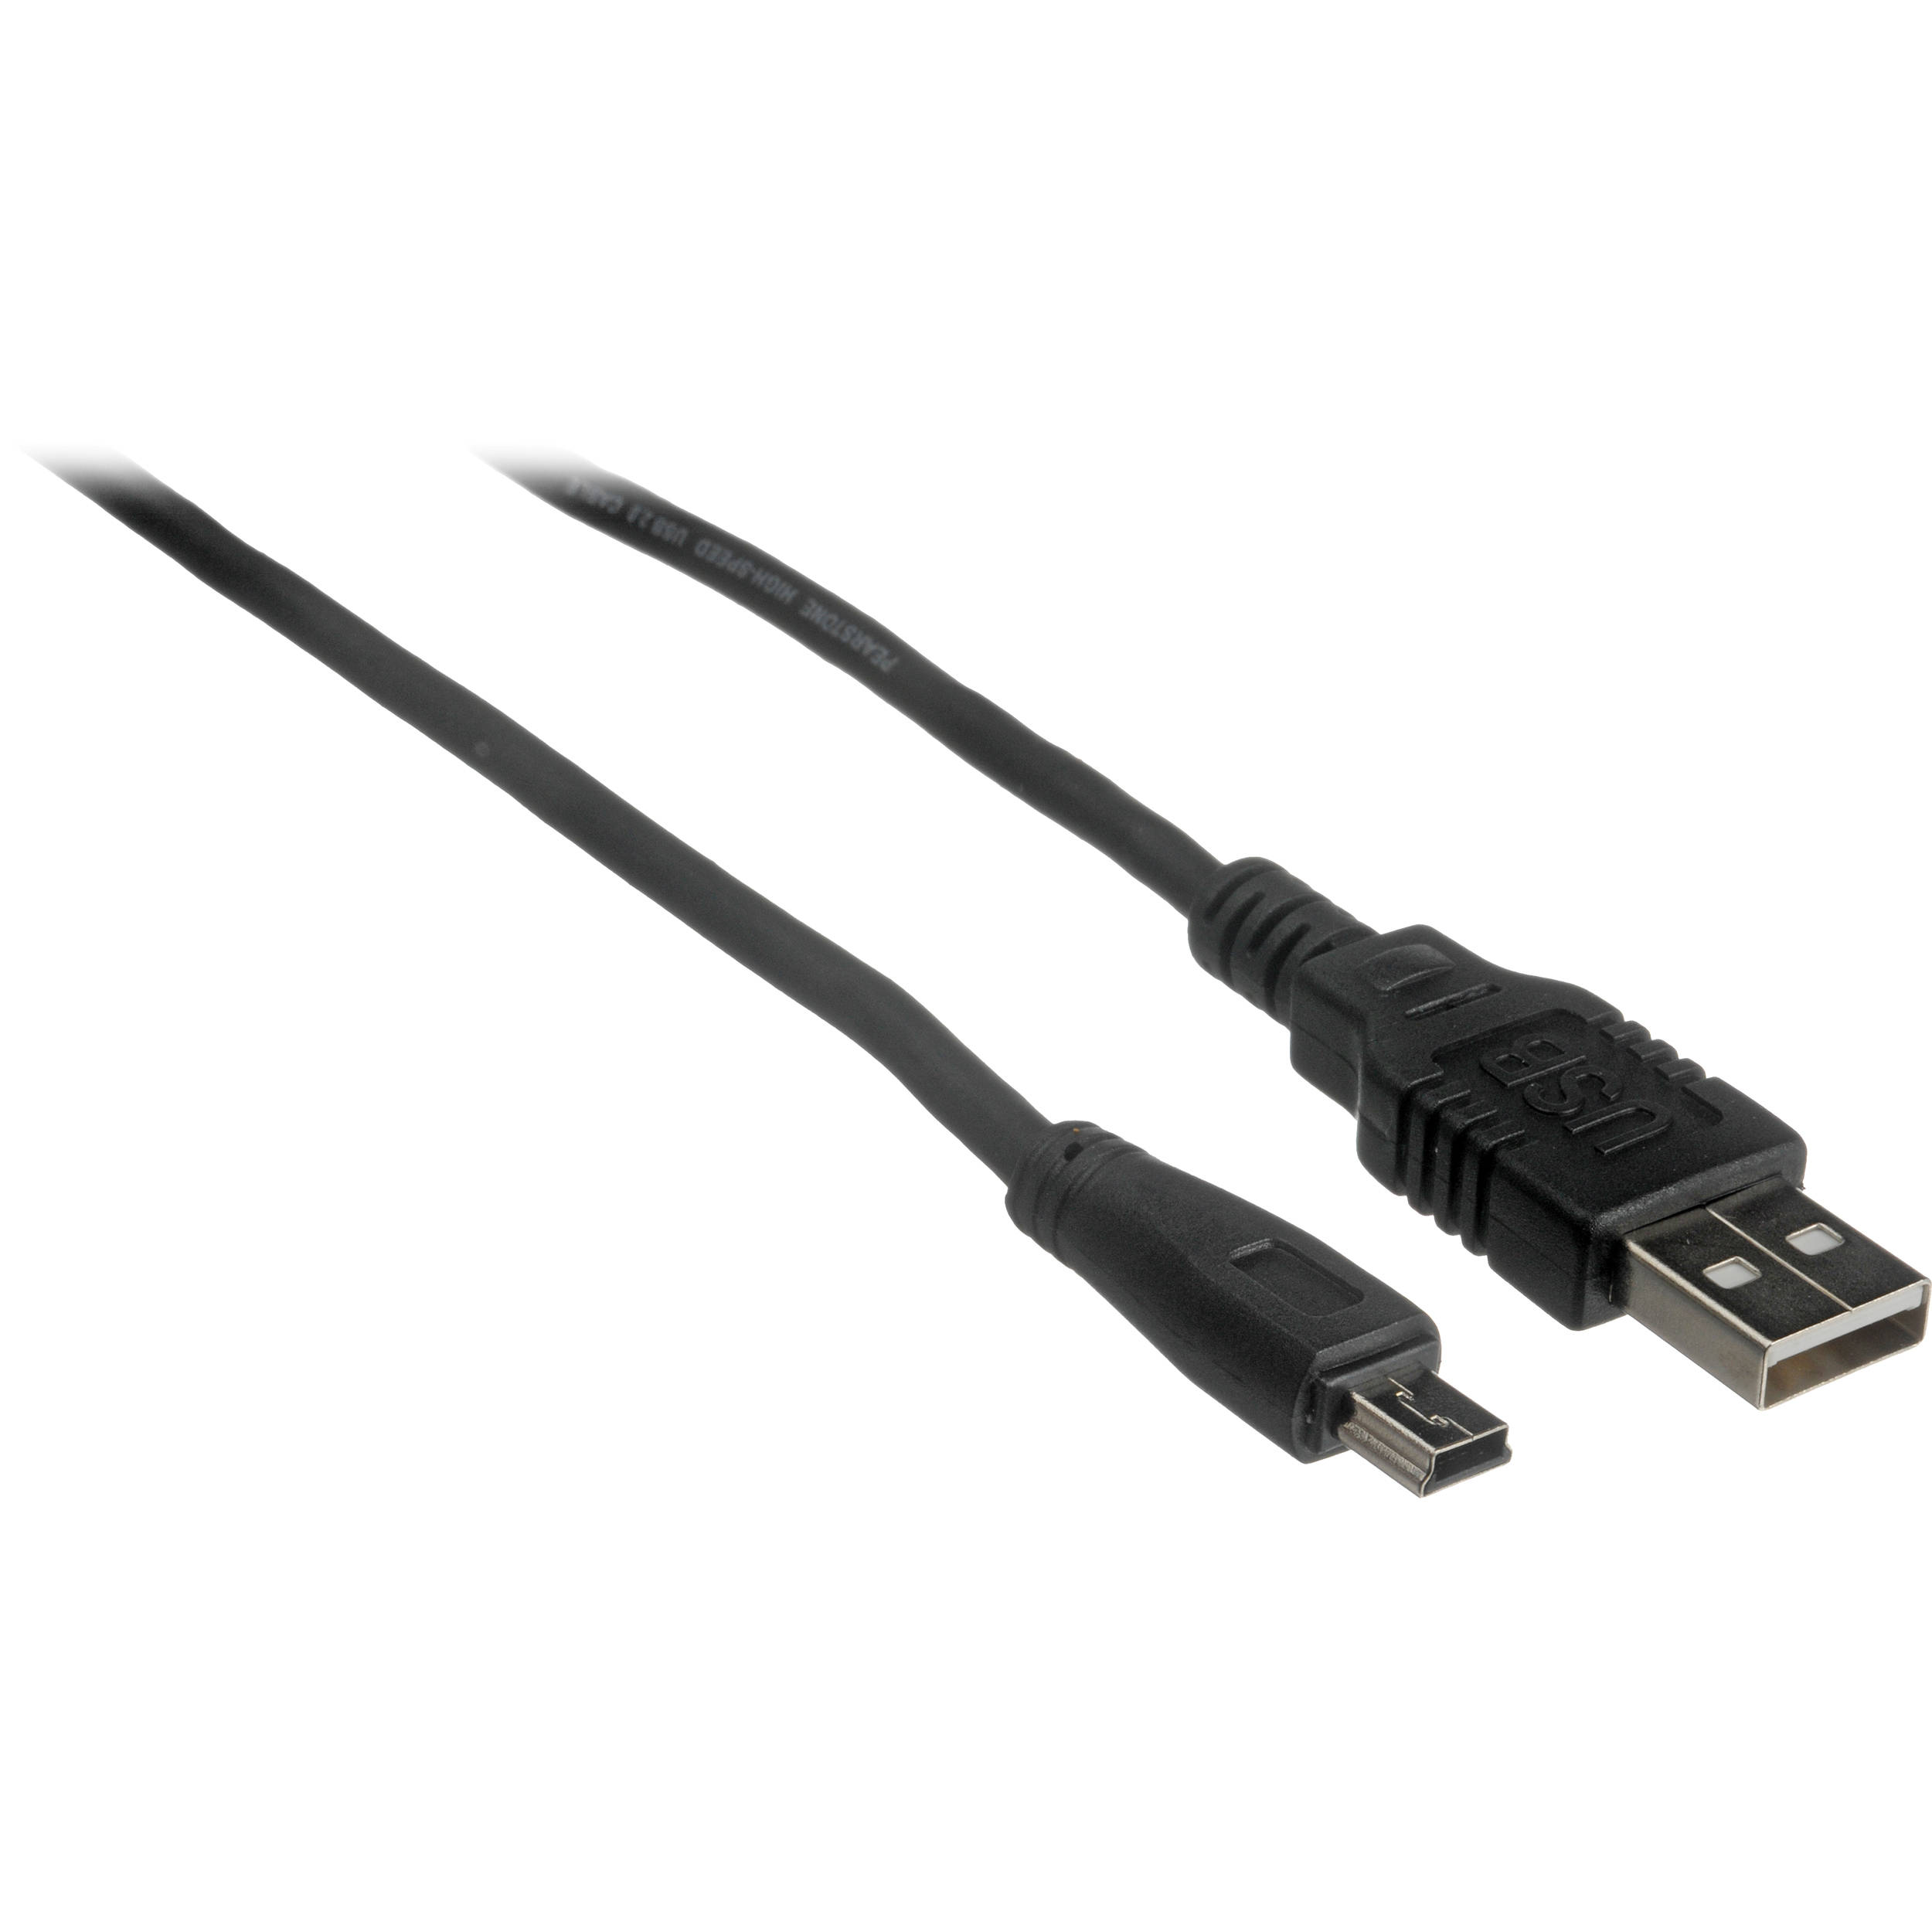 a usb cable